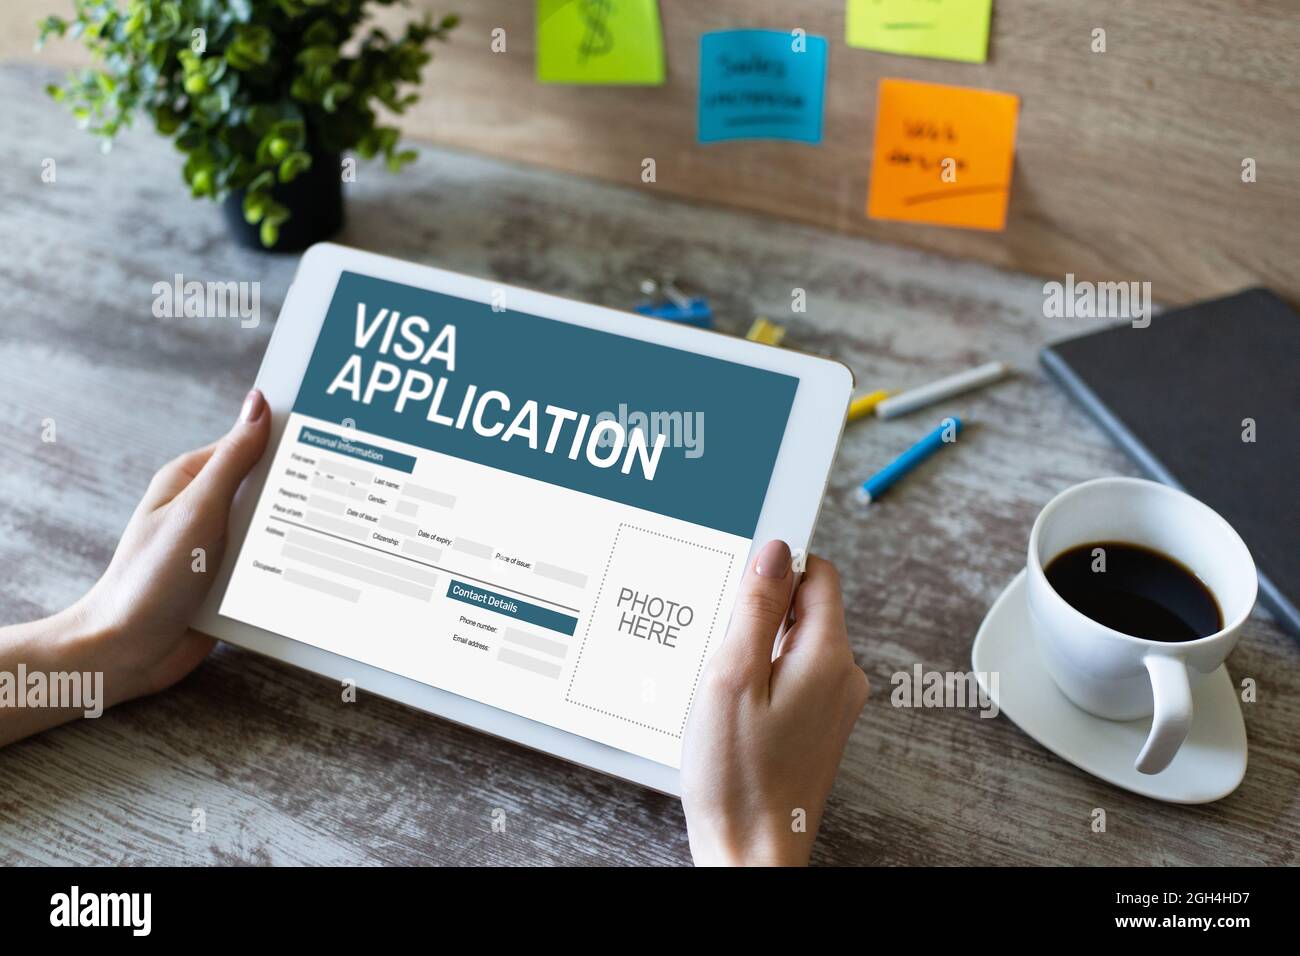 Online Visa application form on screen. Country Visit permit Stock Photo